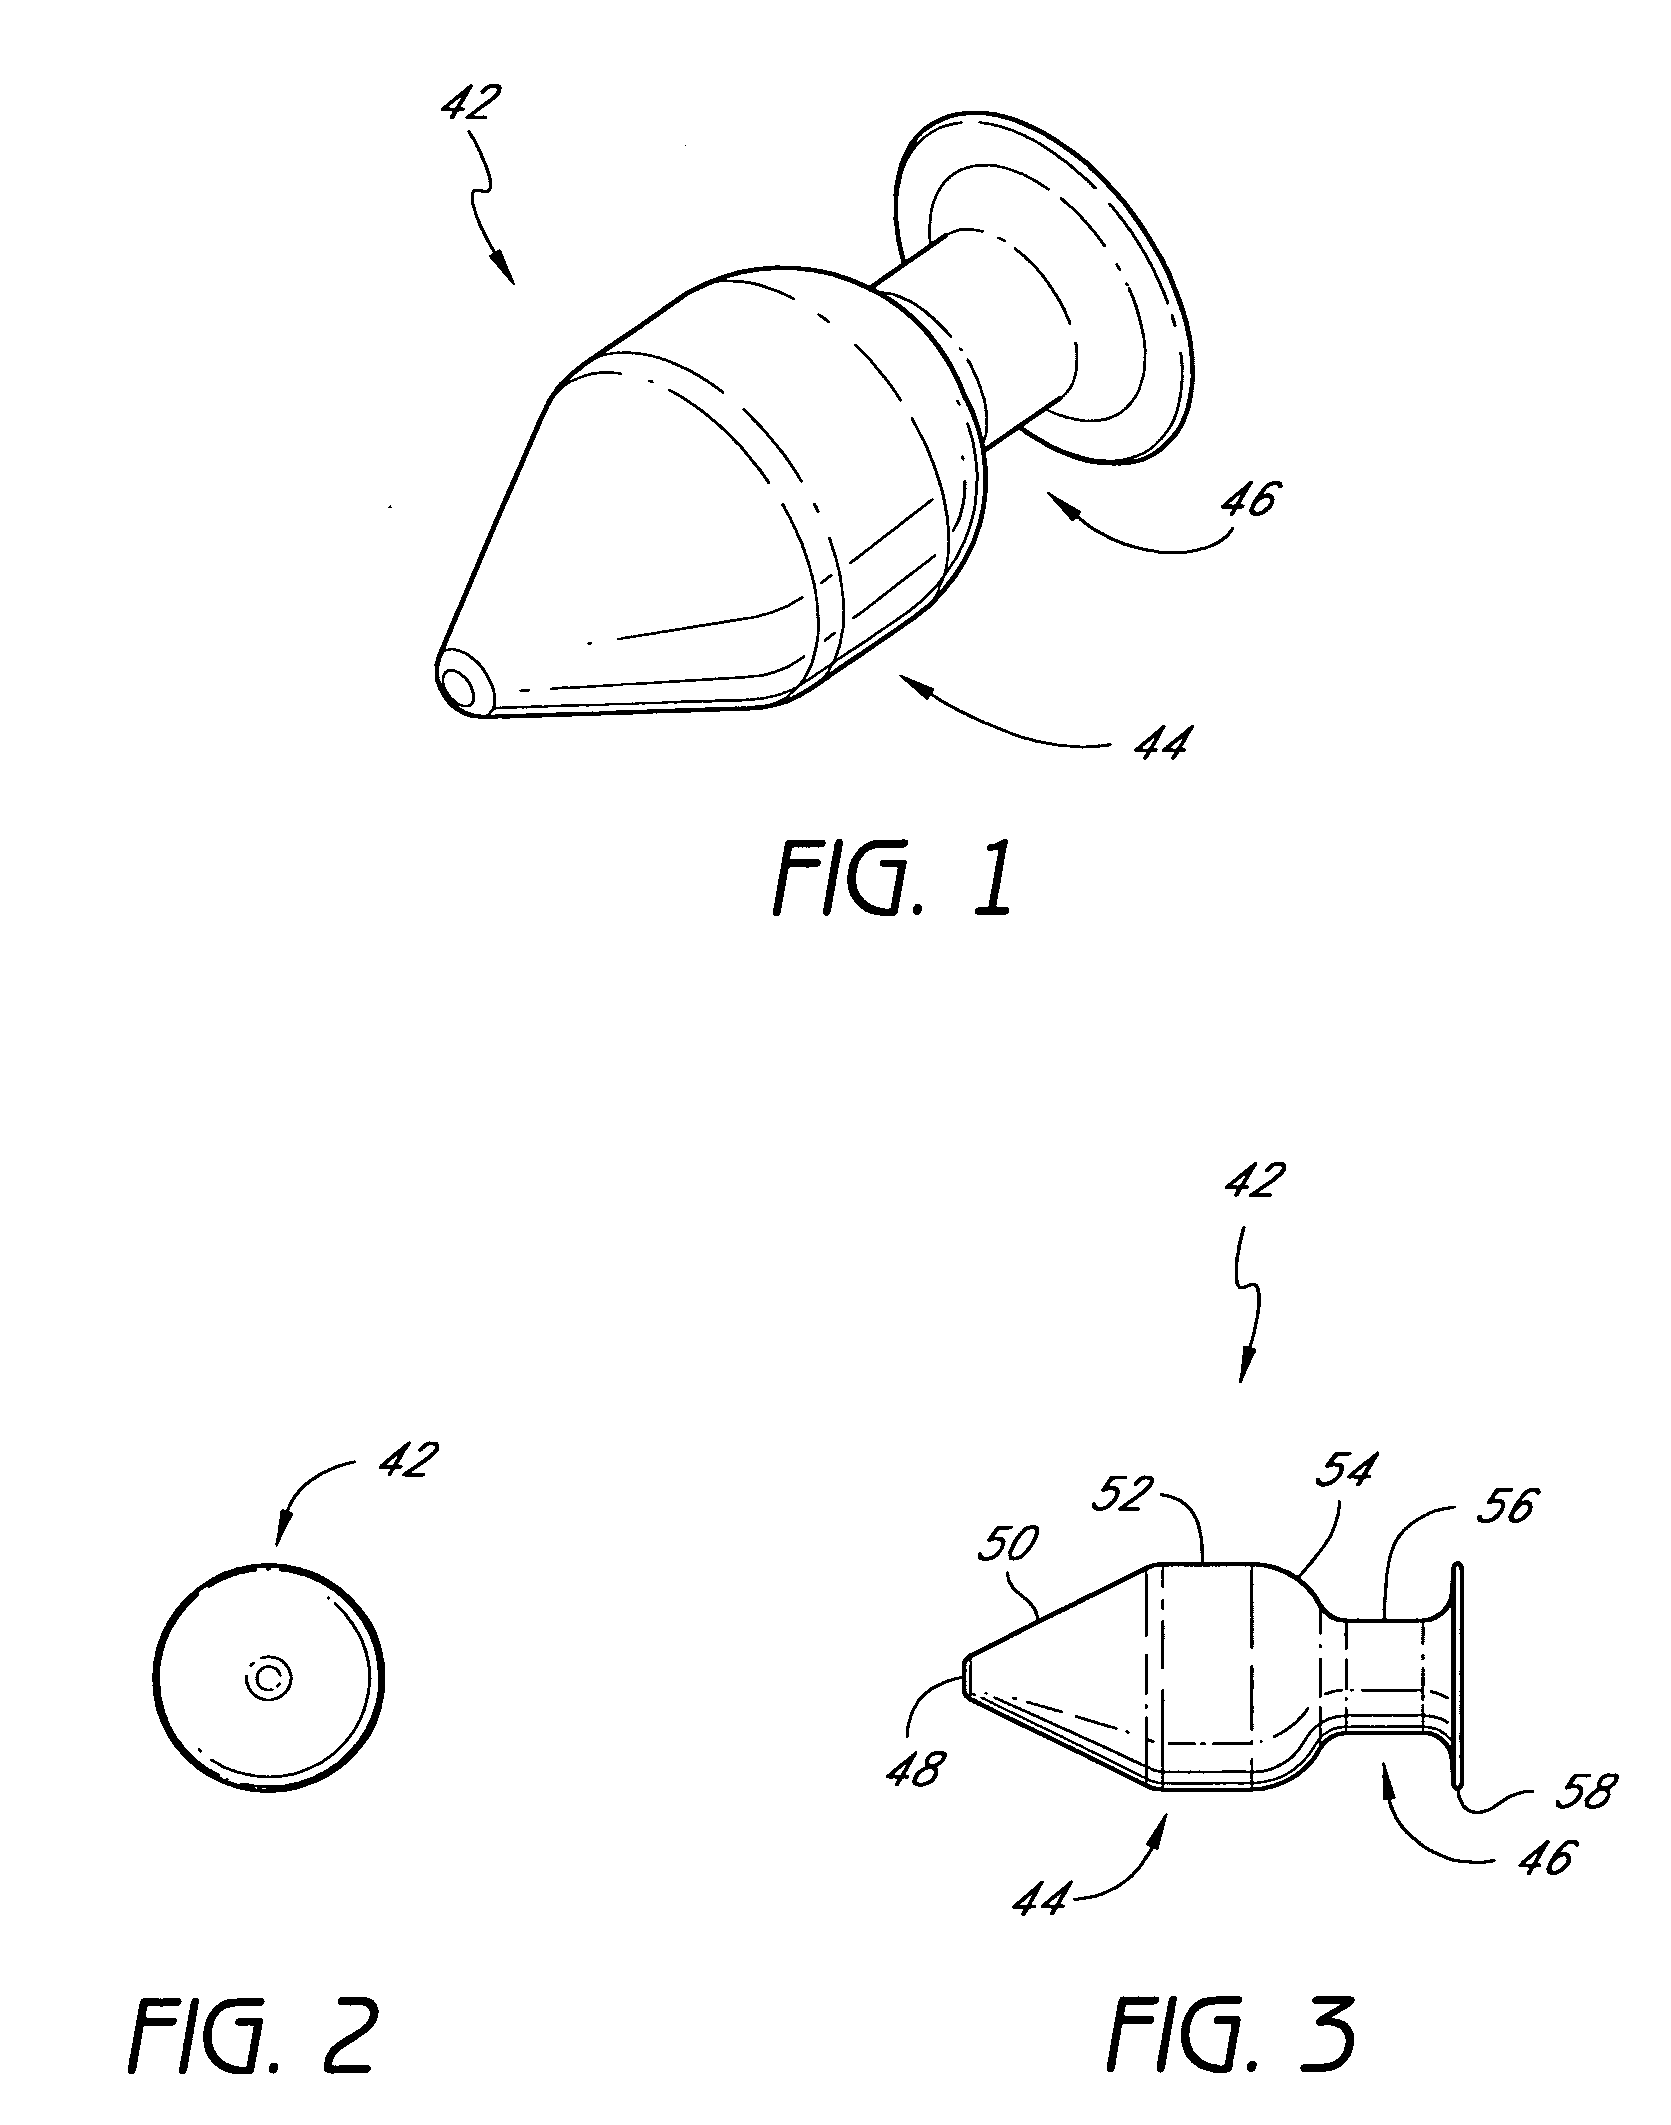 Spinal implants and methods of providing dynamic stability to the spine